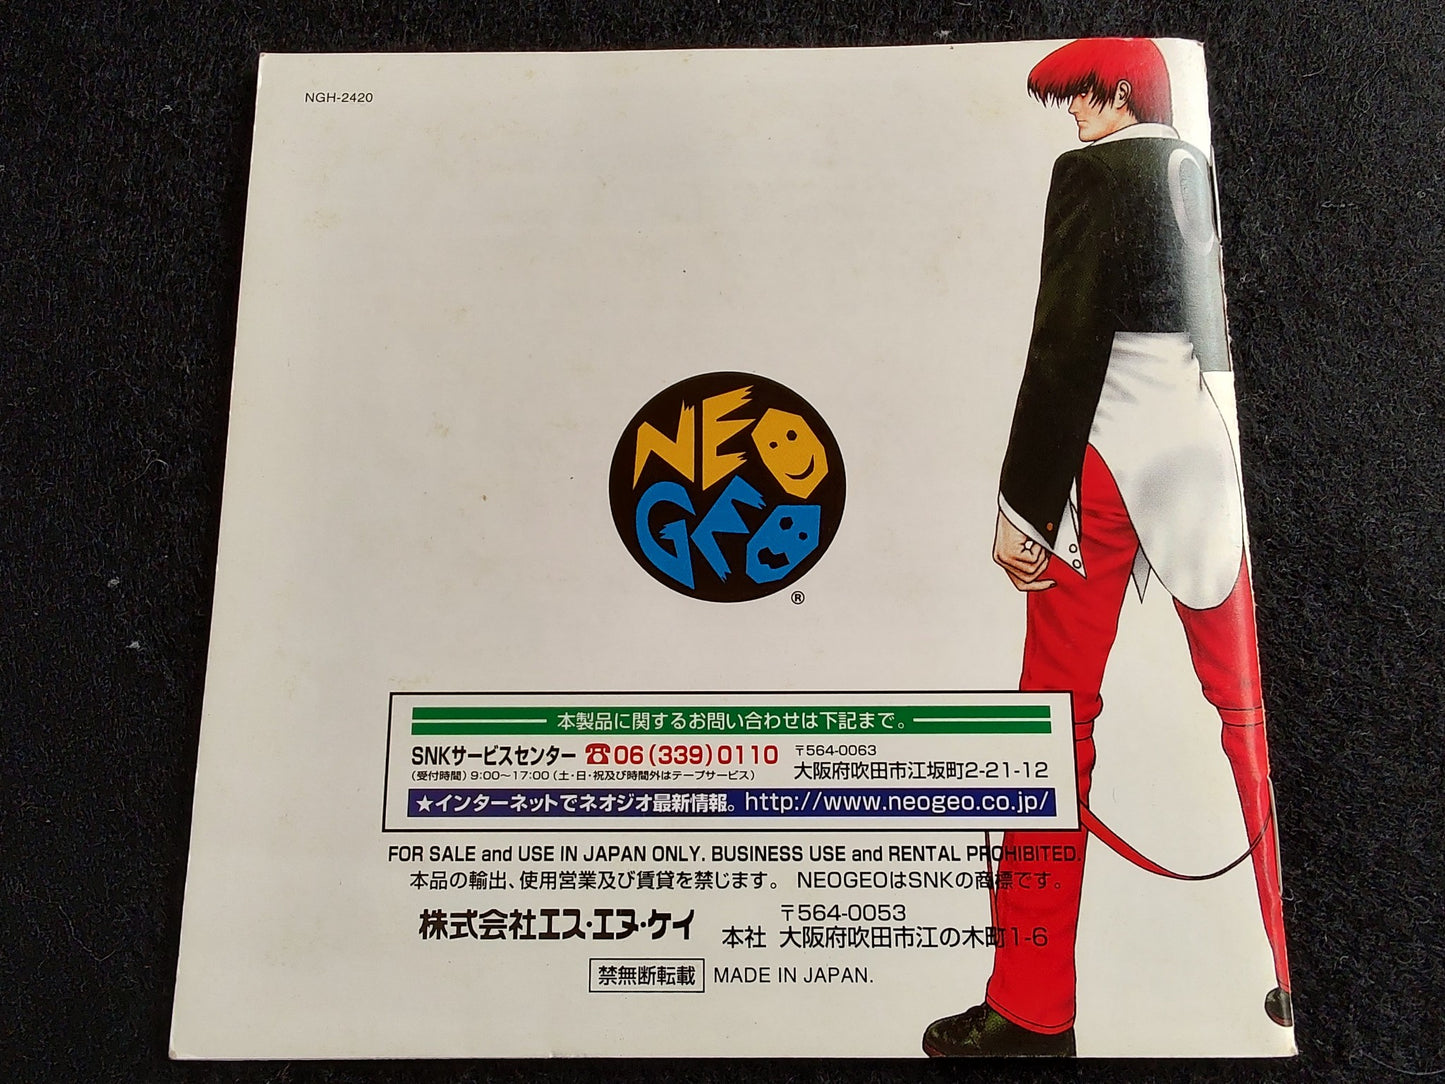 The King of Fighters 98 KOF98 SNK NEO GEO AES Cartridge, Manual Boxed set-f1128-